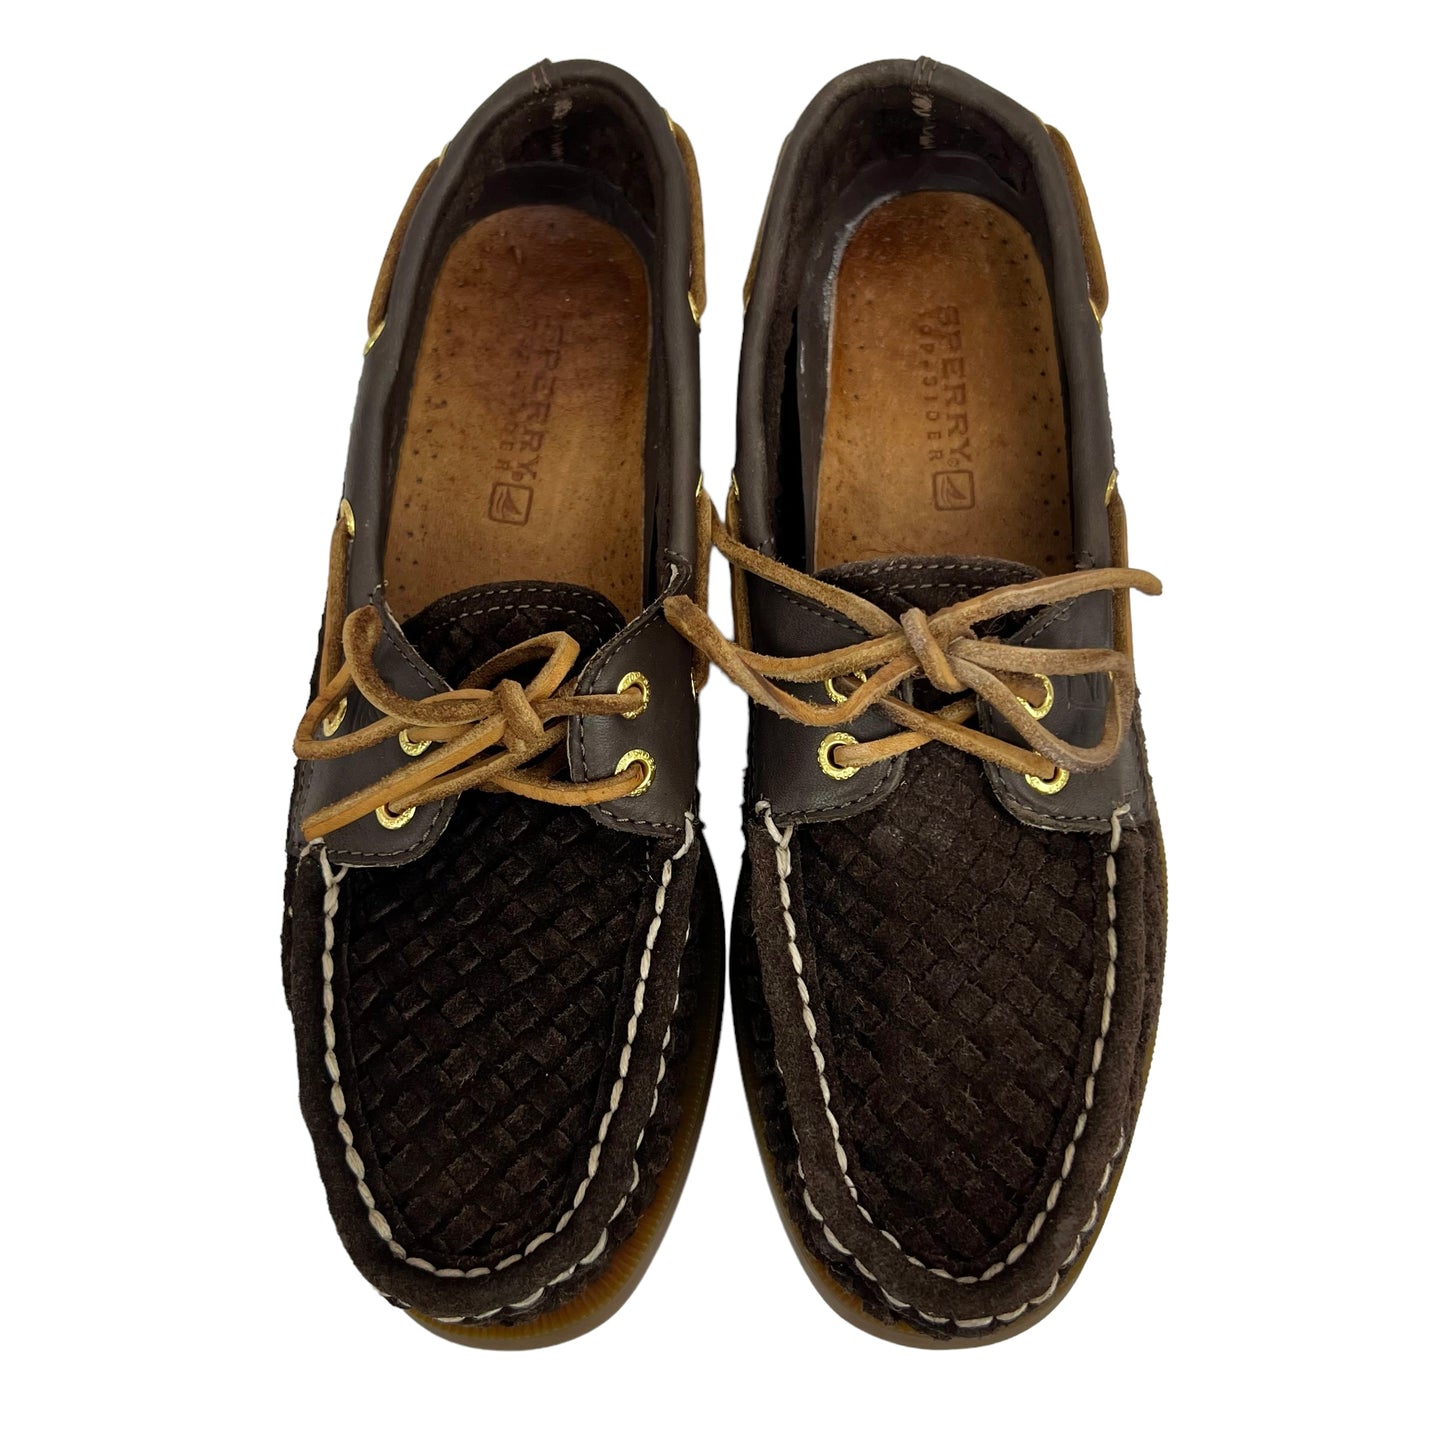 Sperry Top Sider Boat Shoes Loafers Woven Brown Suede Size 8